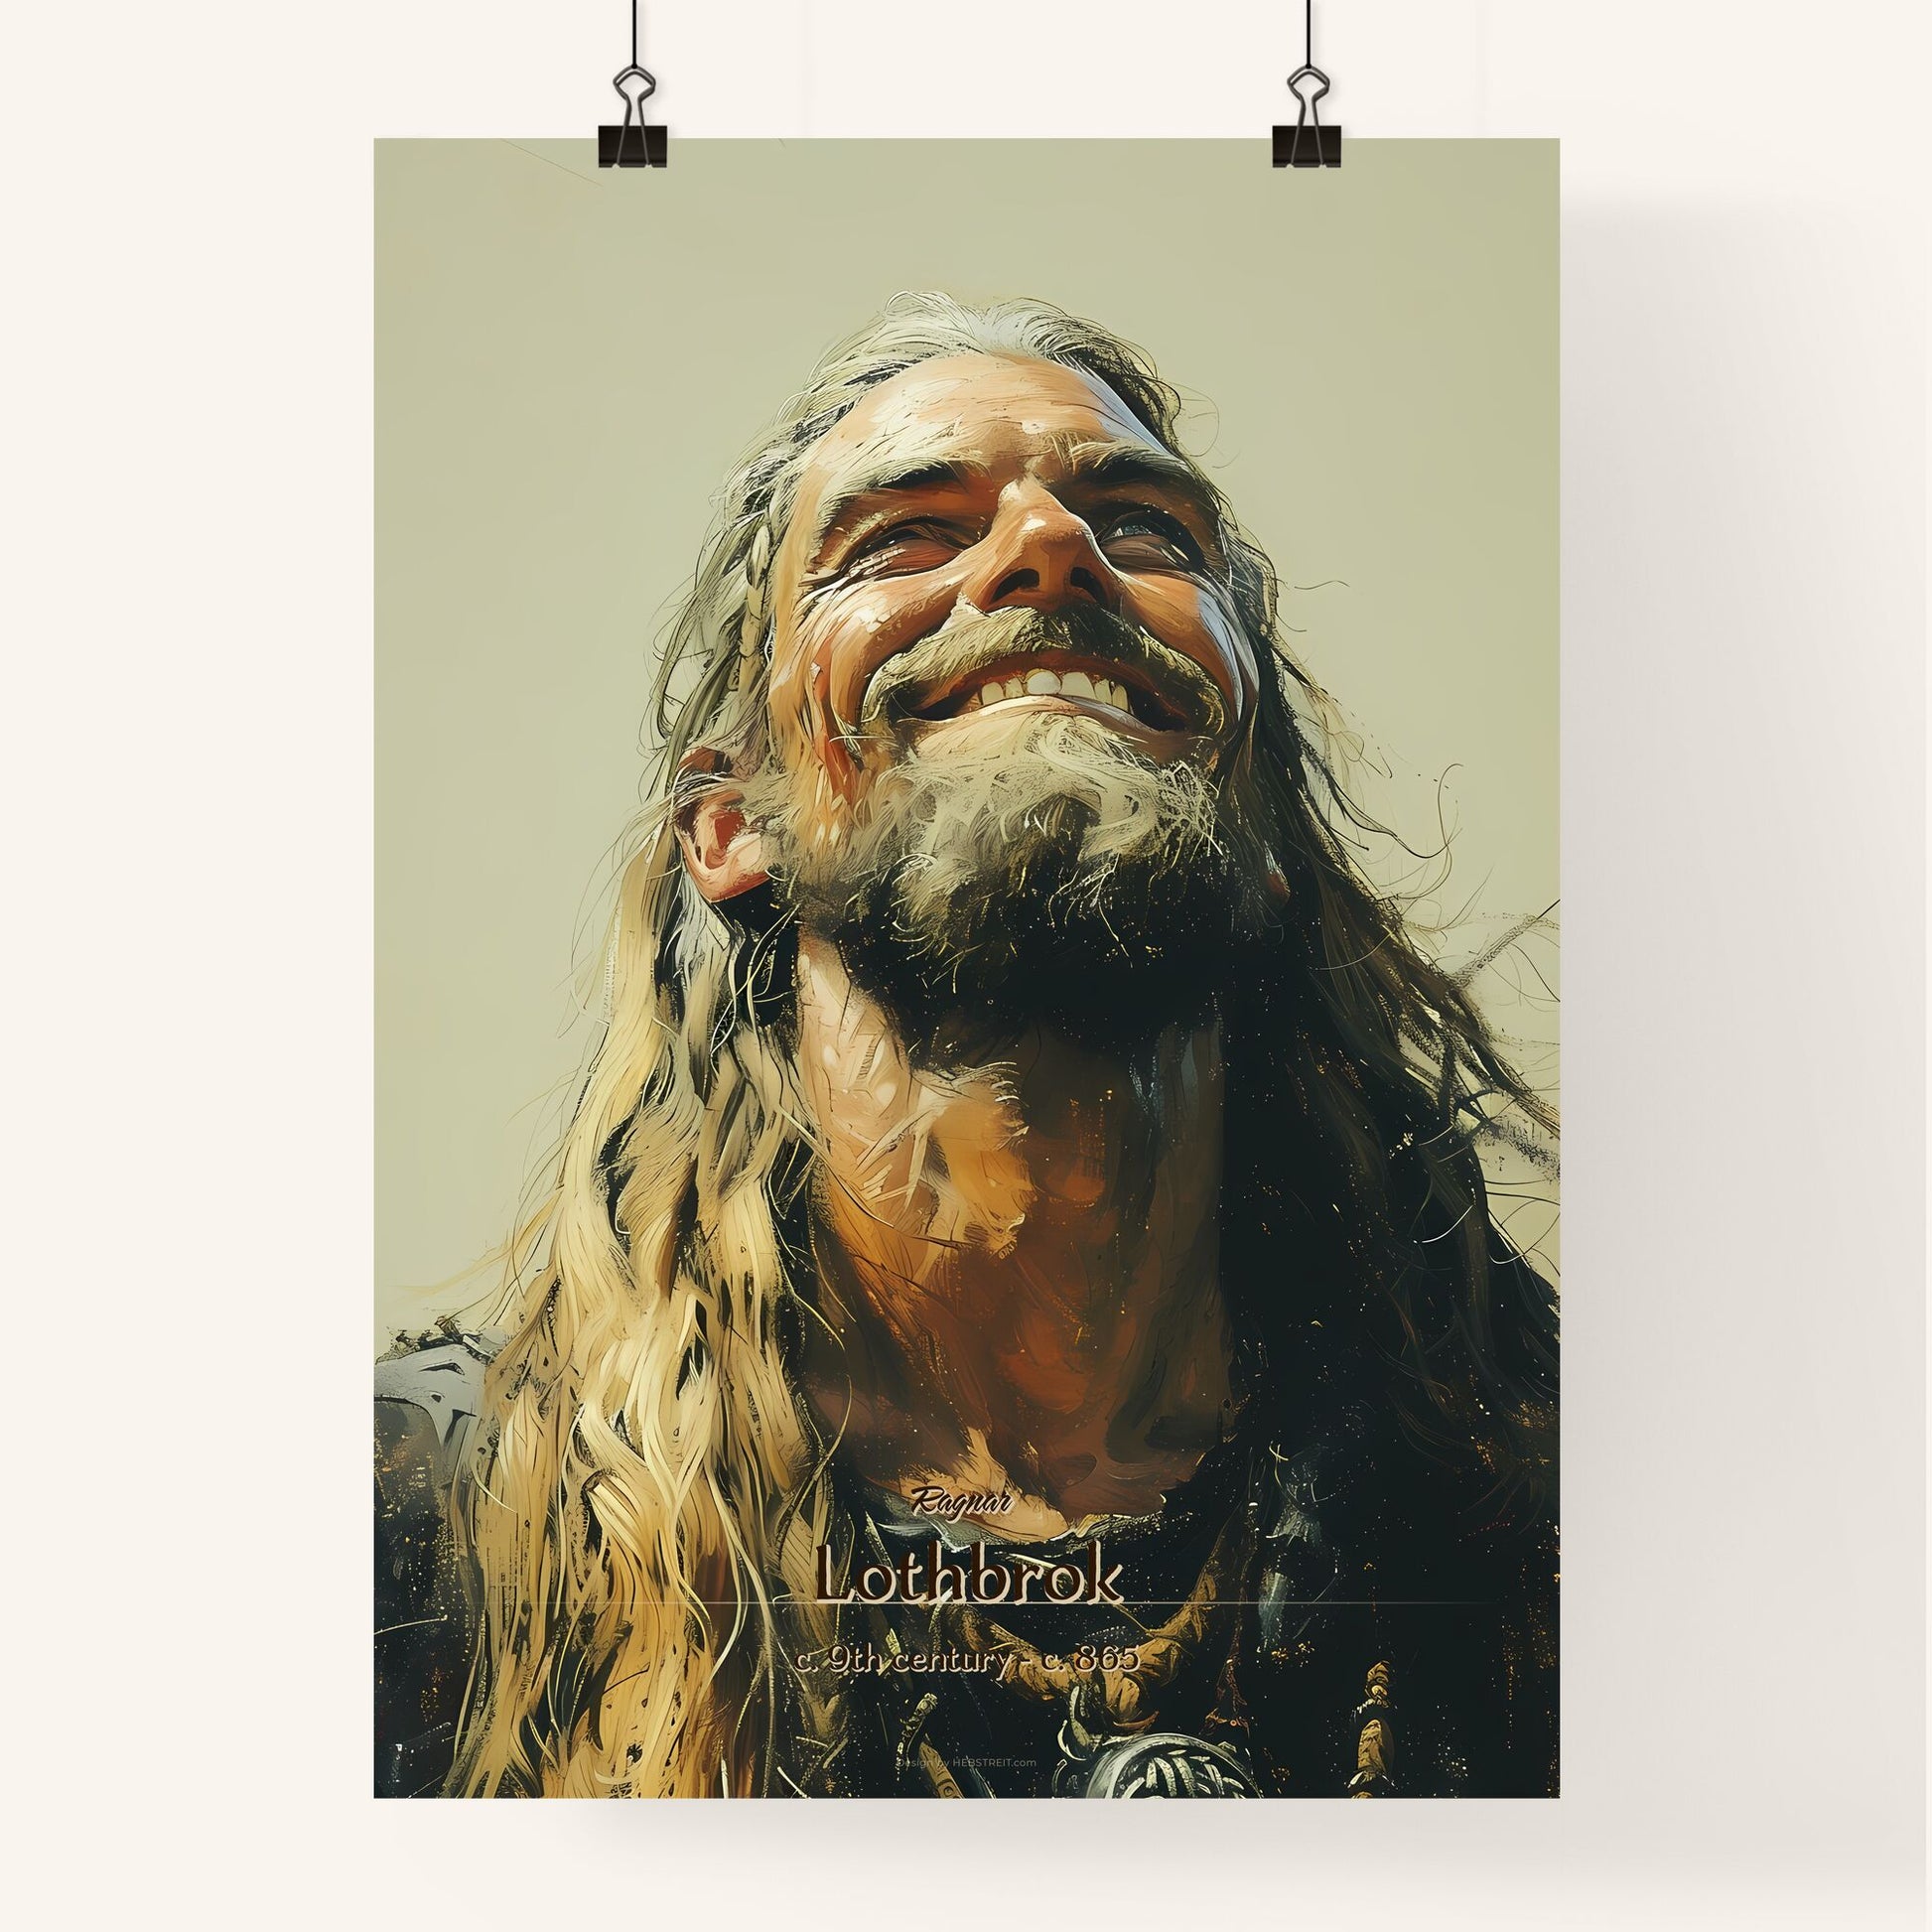 Ragnar, Lothbrok, c. 9th century - c. 865, A Poster of a man with long hair and beard smiling Default Title